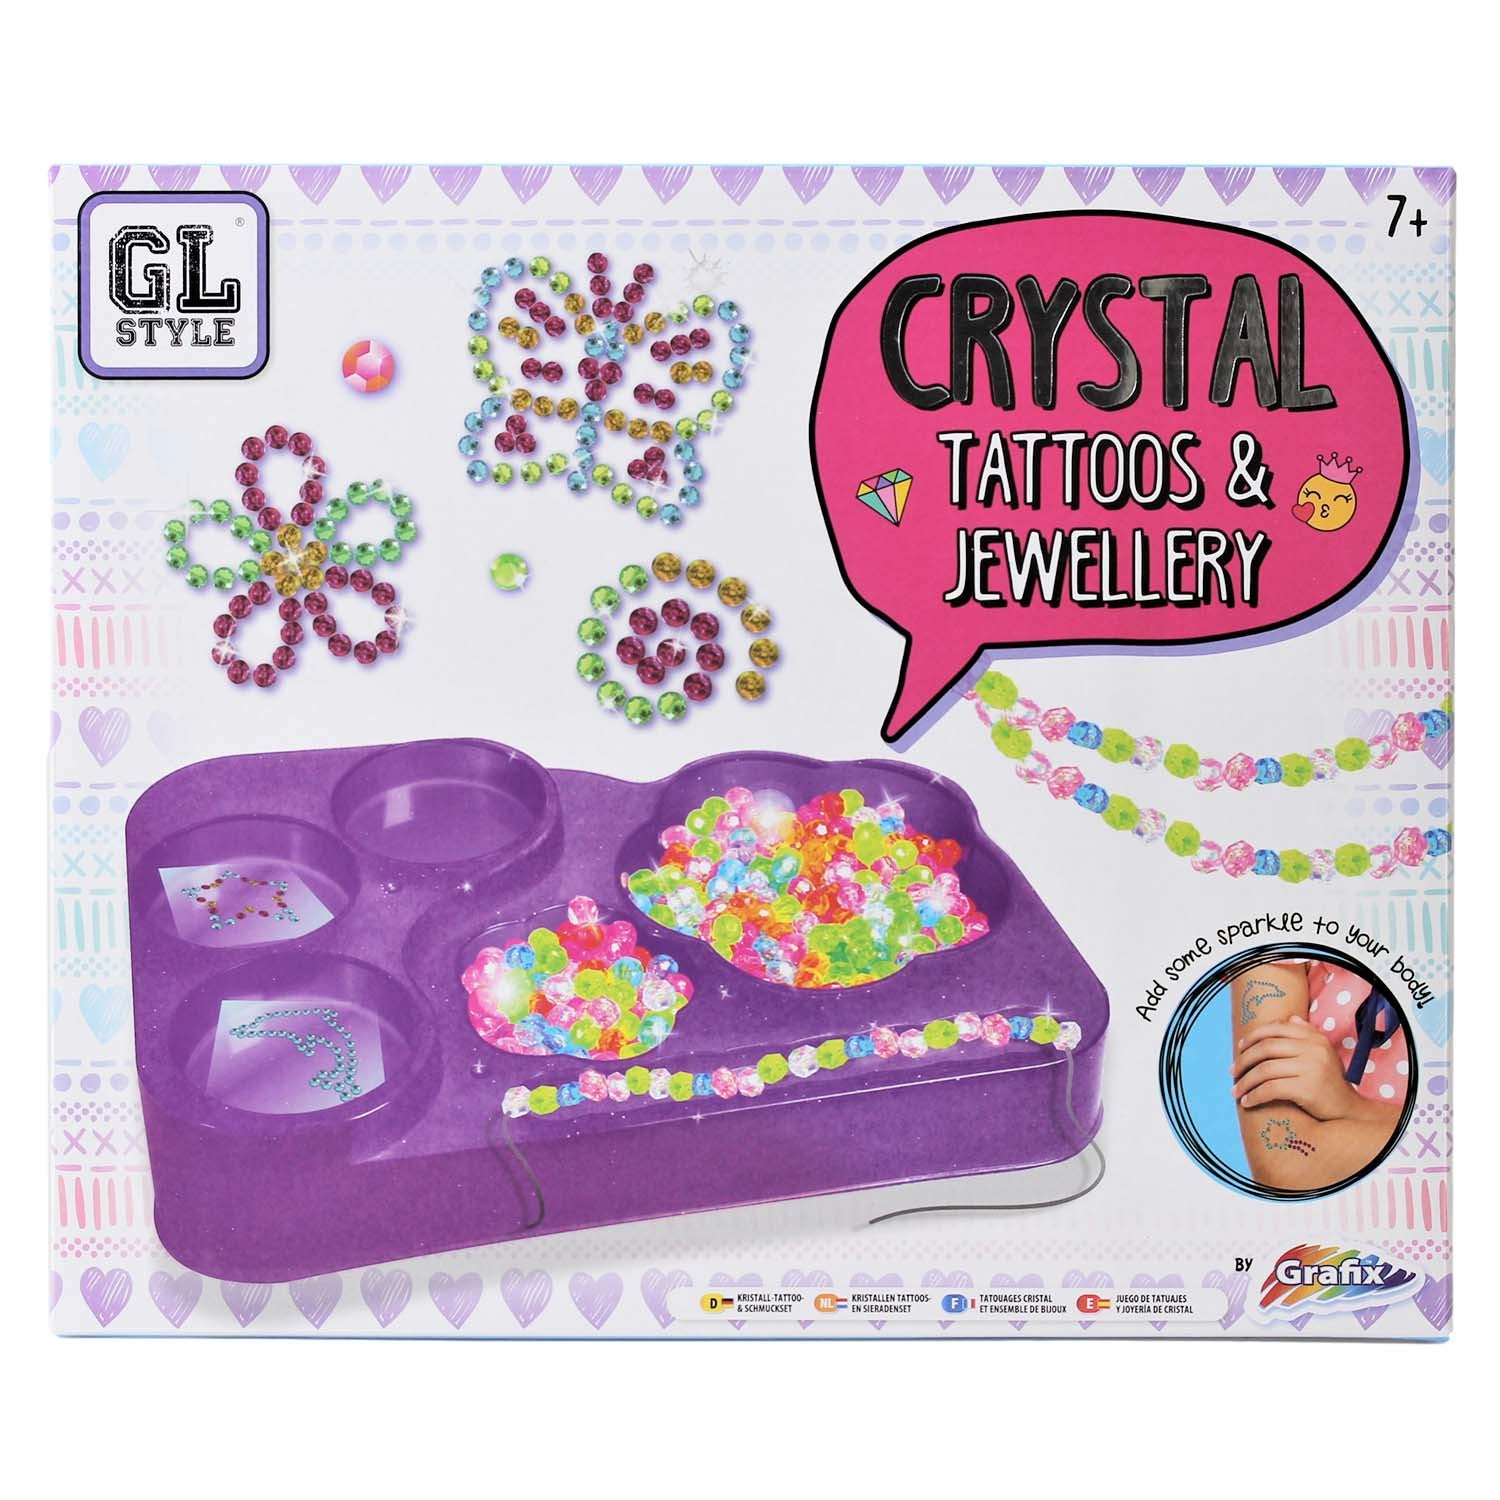 GL Style Crystal Tattoos & Jewellery Set for Girls 8+